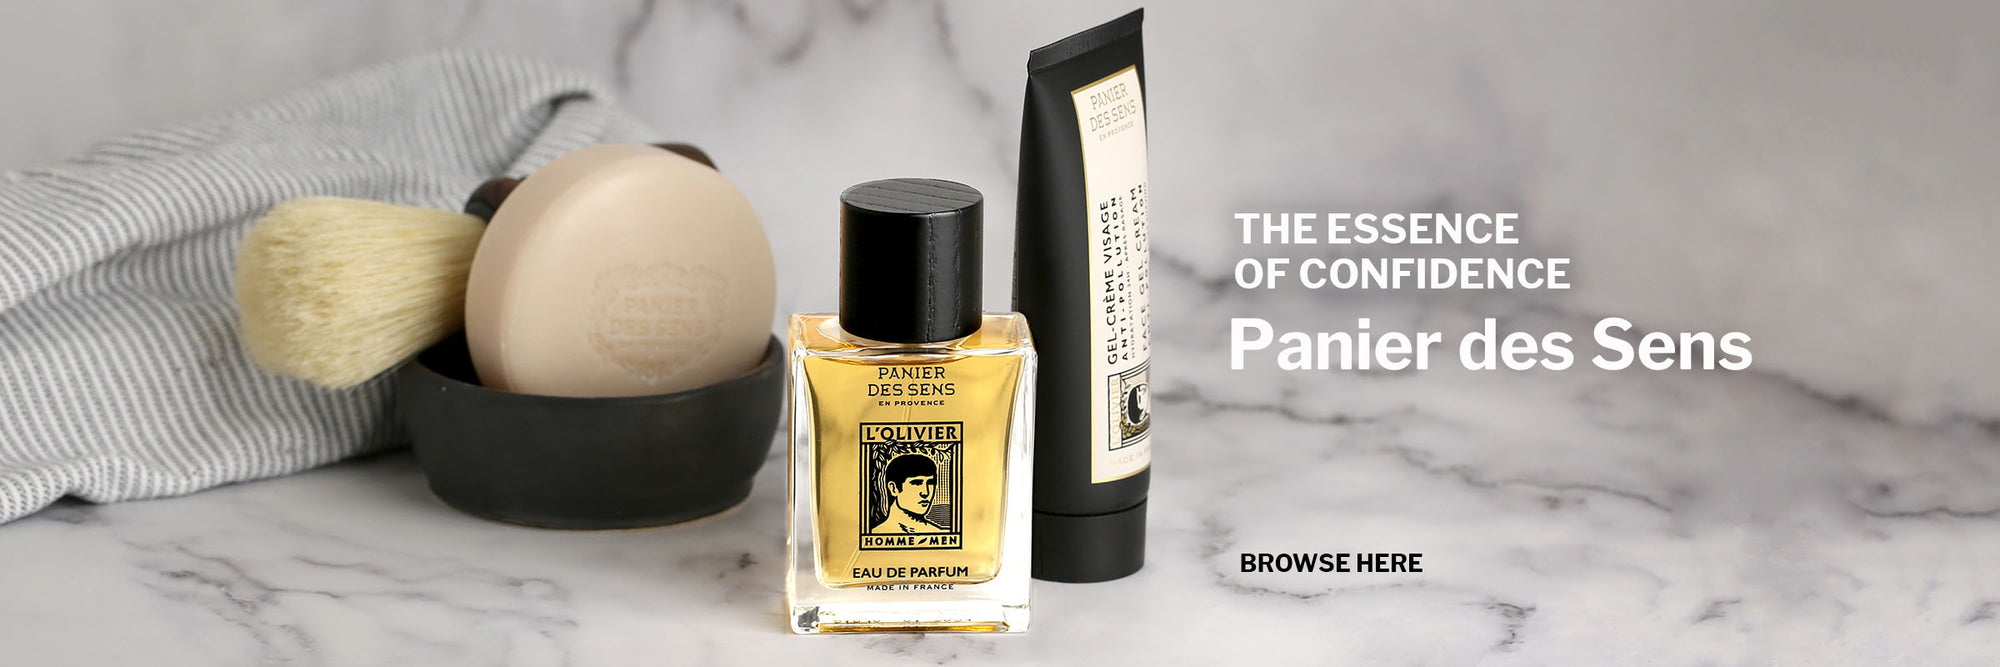 Shavibg soap and brush with black terracotta bowl, Eau de Parum bottle in centre, and Face Gel Cream on a white and grey marble background with grey and white striped face cloth